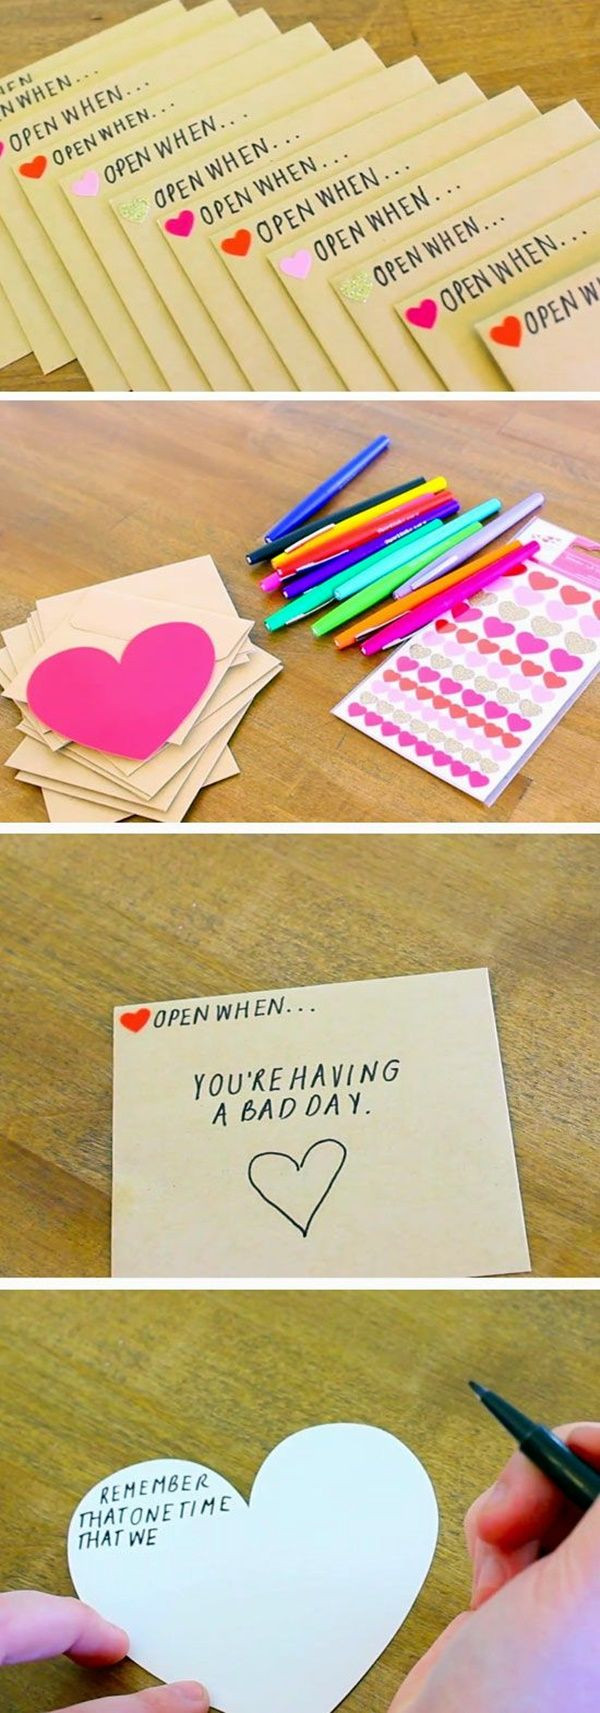 Homemade Gift Ideas For Boyfriend
 101 Homemade Valentines Day Ideas for Him that re really